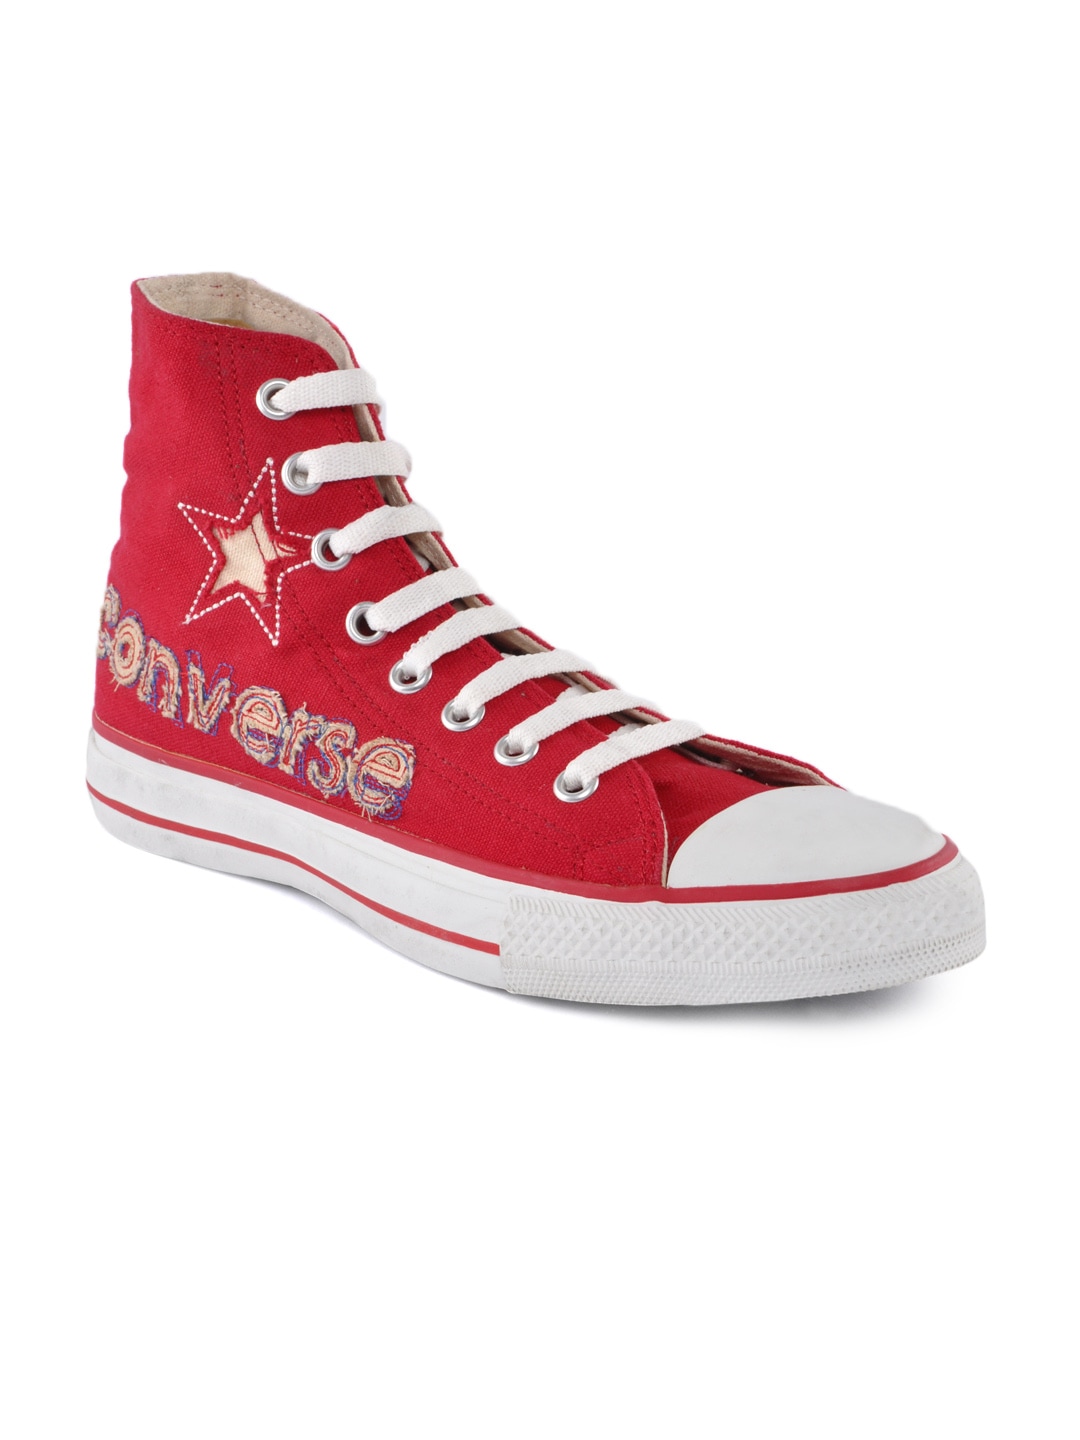 Converse Unisex Red Casual Shoes